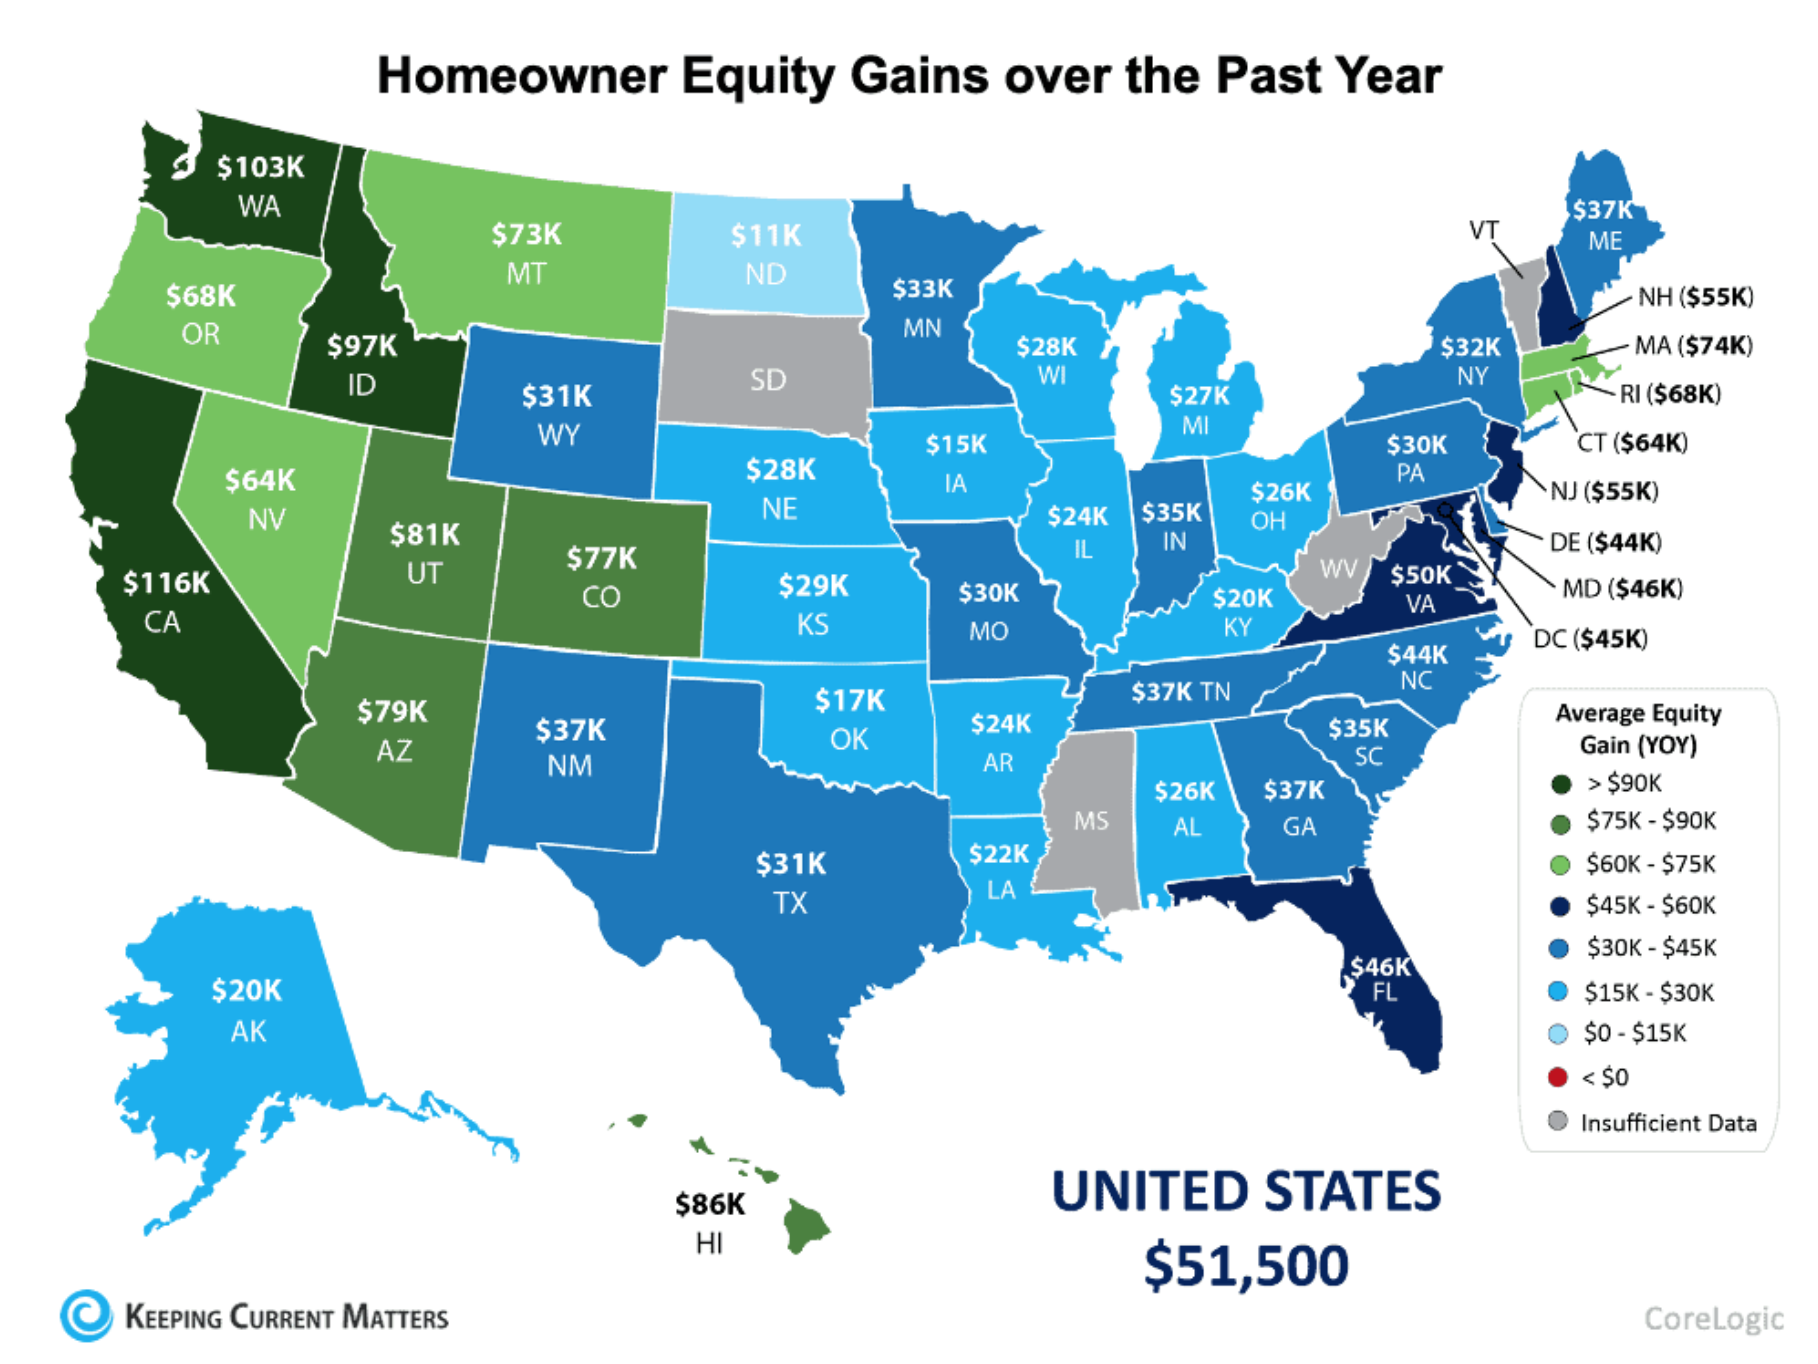 Homeowner Equity Gains over the Past Year